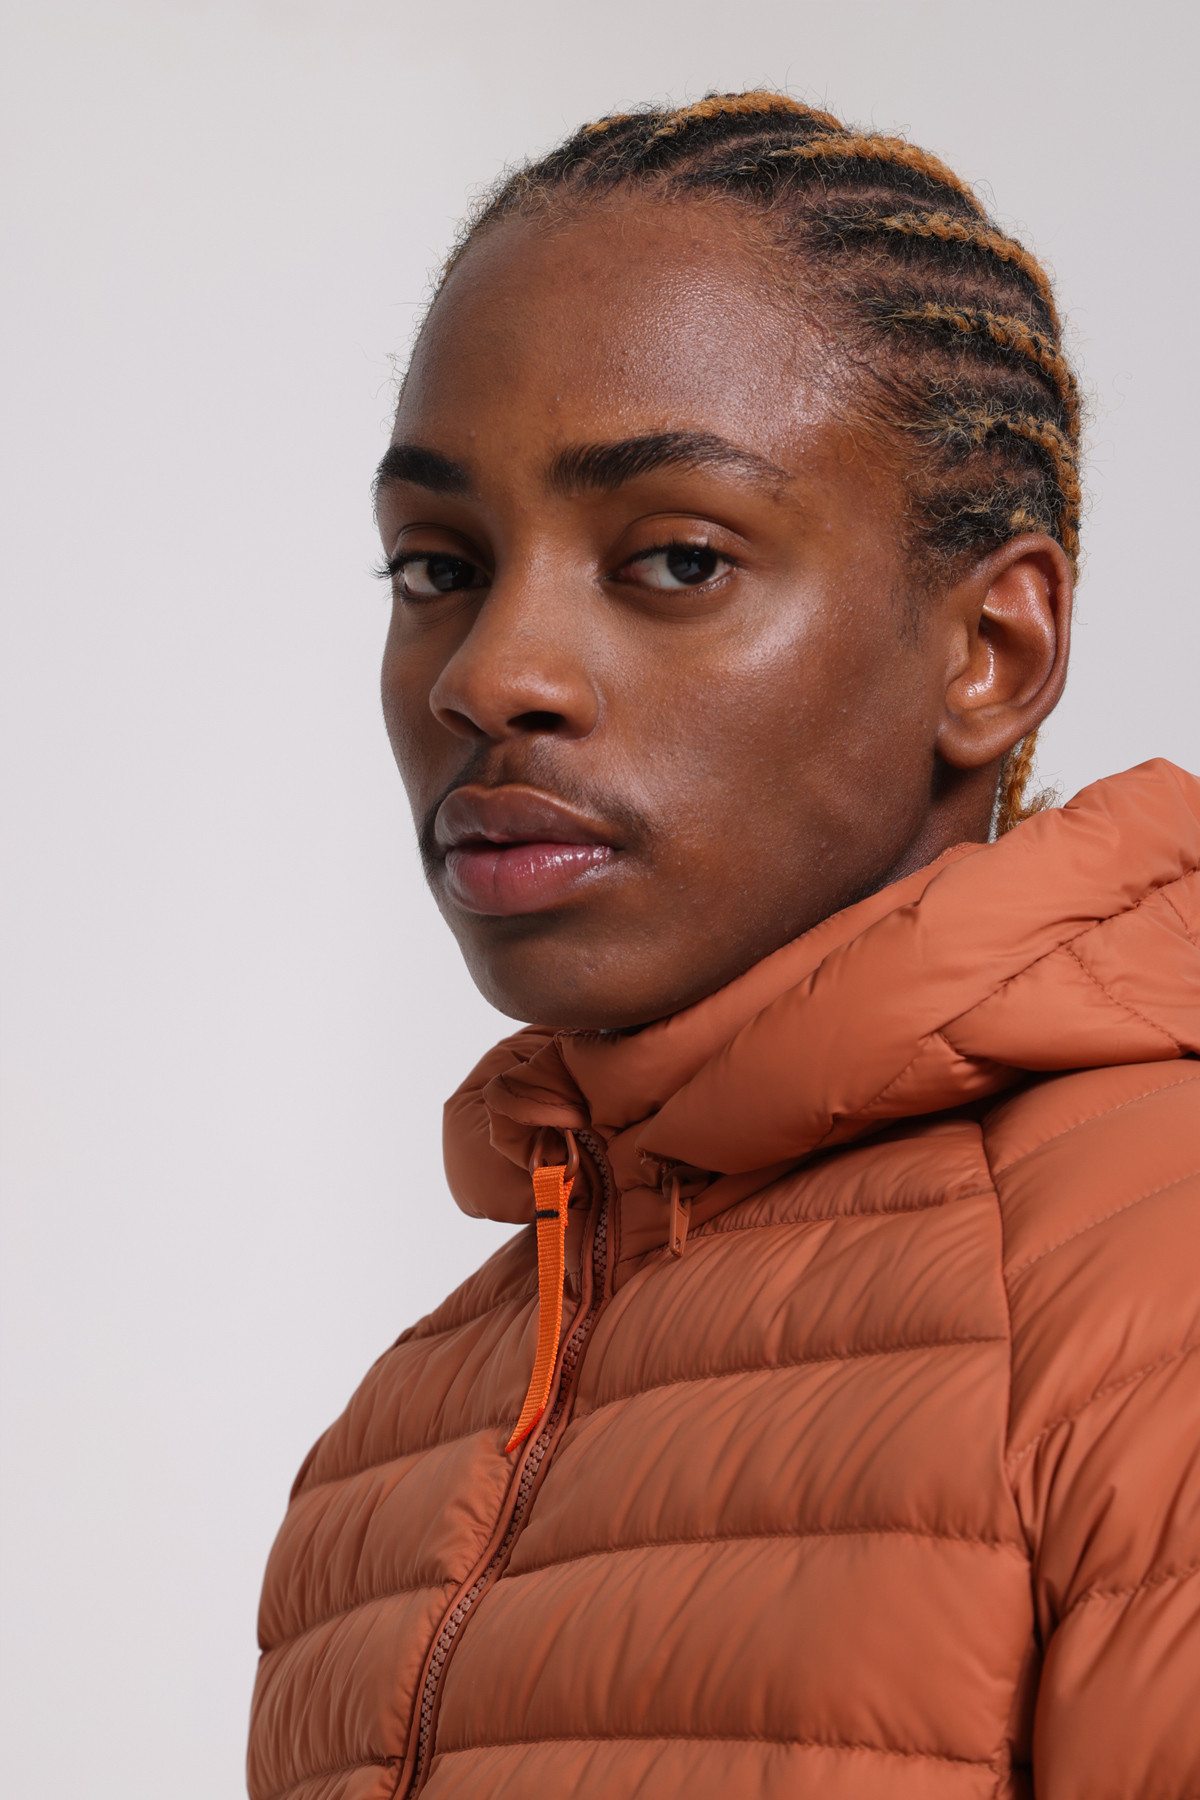 Jacques ultralight down jacket Rust